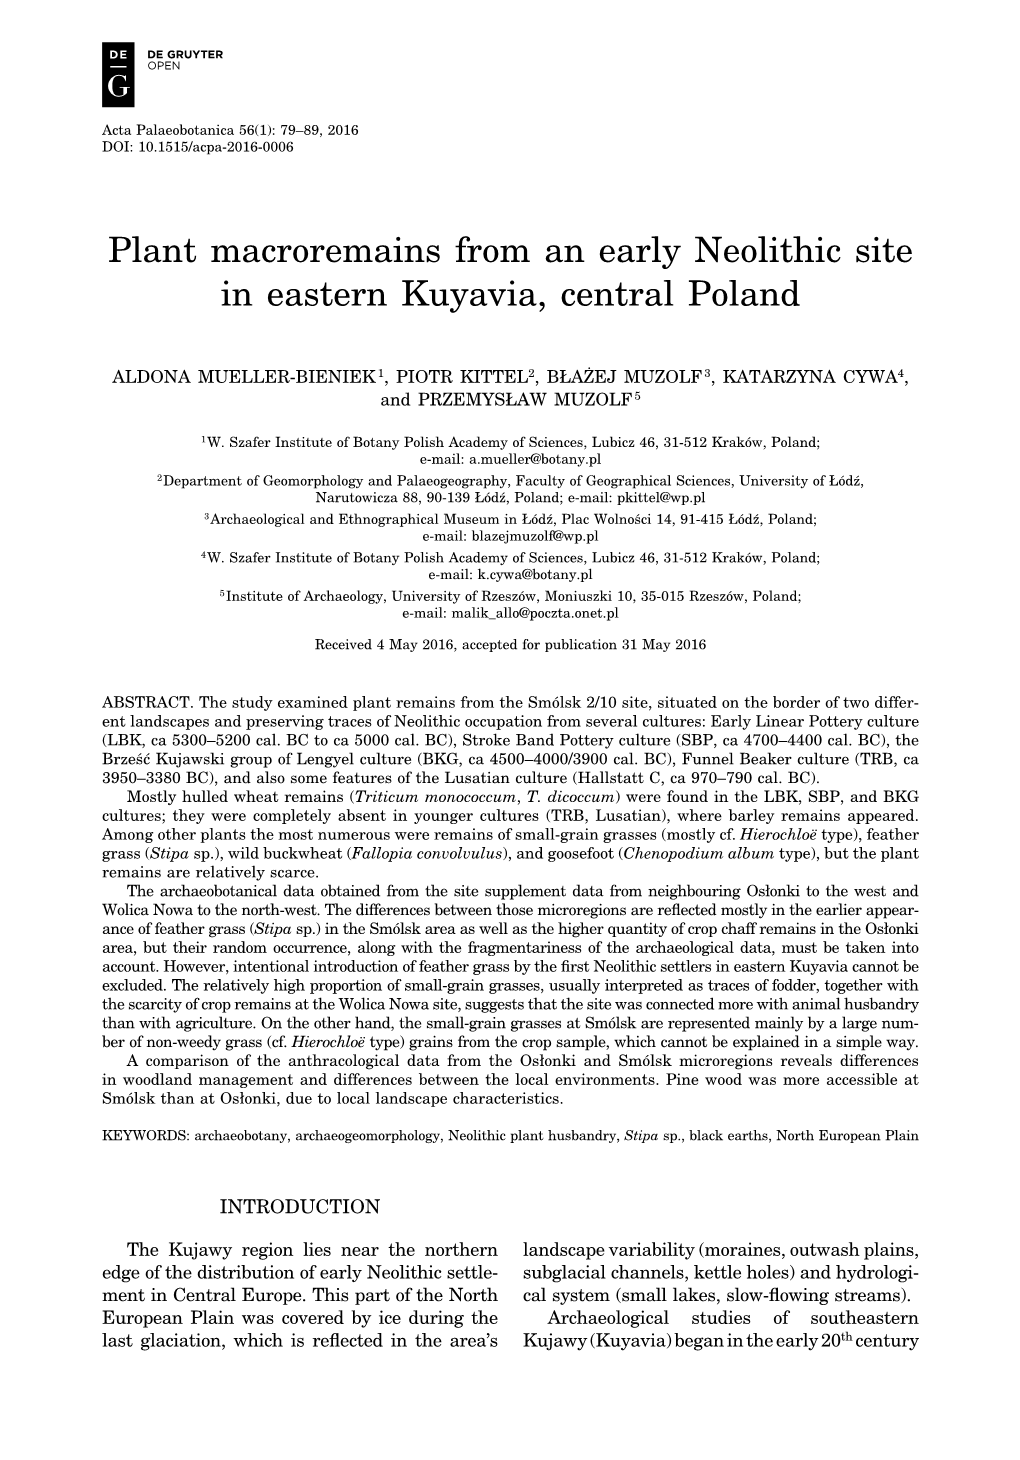 Plant Macroremains from an Early Neolithic Site in Eastern Kuyavia, Central Poland